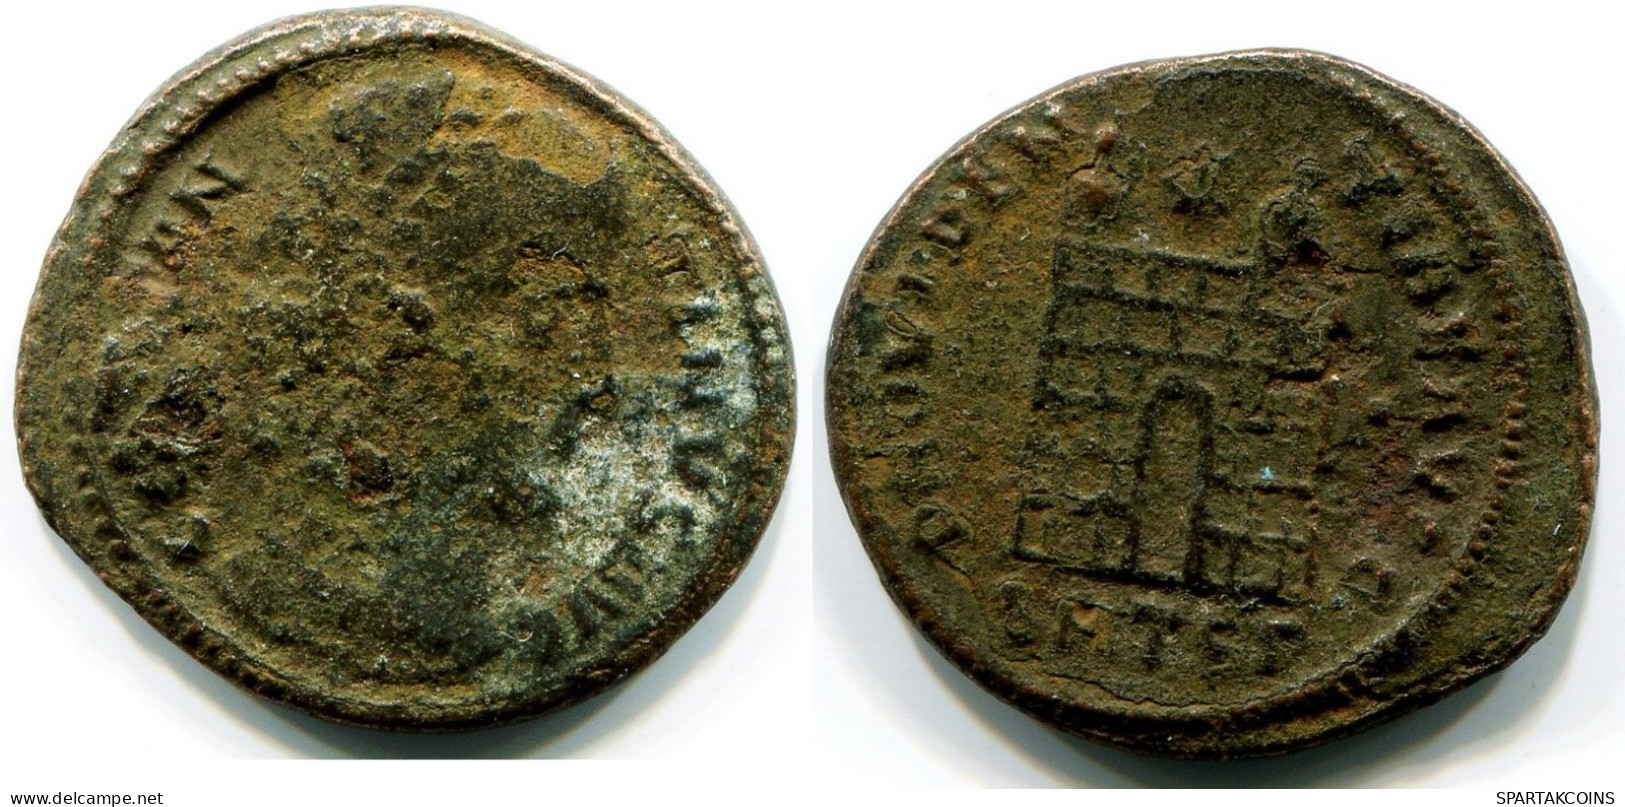 CONSTANTINE I MINTED IN THESSALONICA FOUND IN IHNASYAH HOARD #ANC11136.14.F.A - The Christian Empire (307 AD To 363 AD)